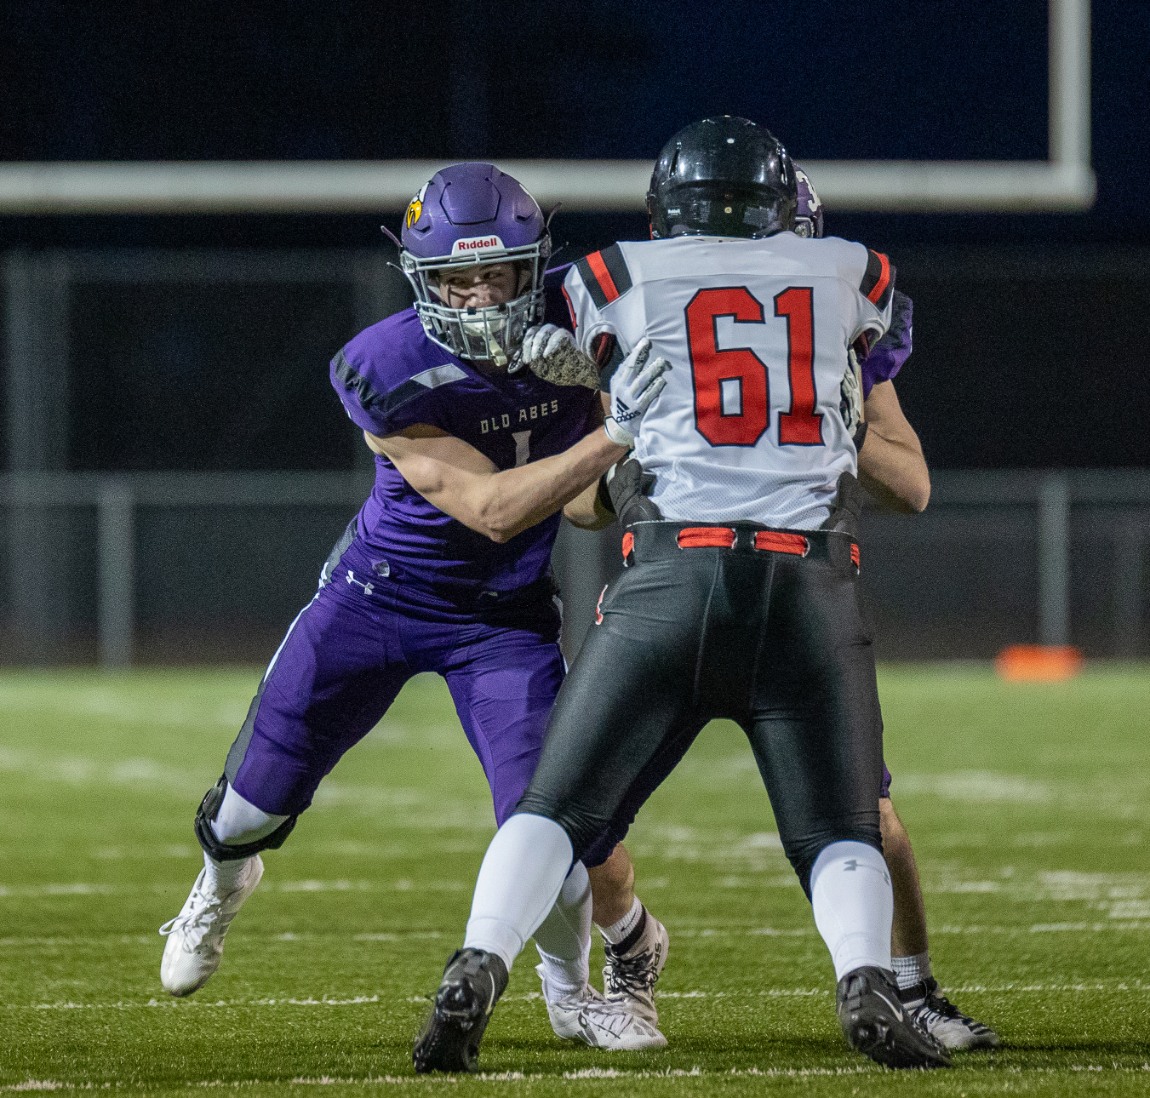 Eau-Claire-Memorial-JV-Football-LaCrosse-Central-at-Home-3-29-21-1819